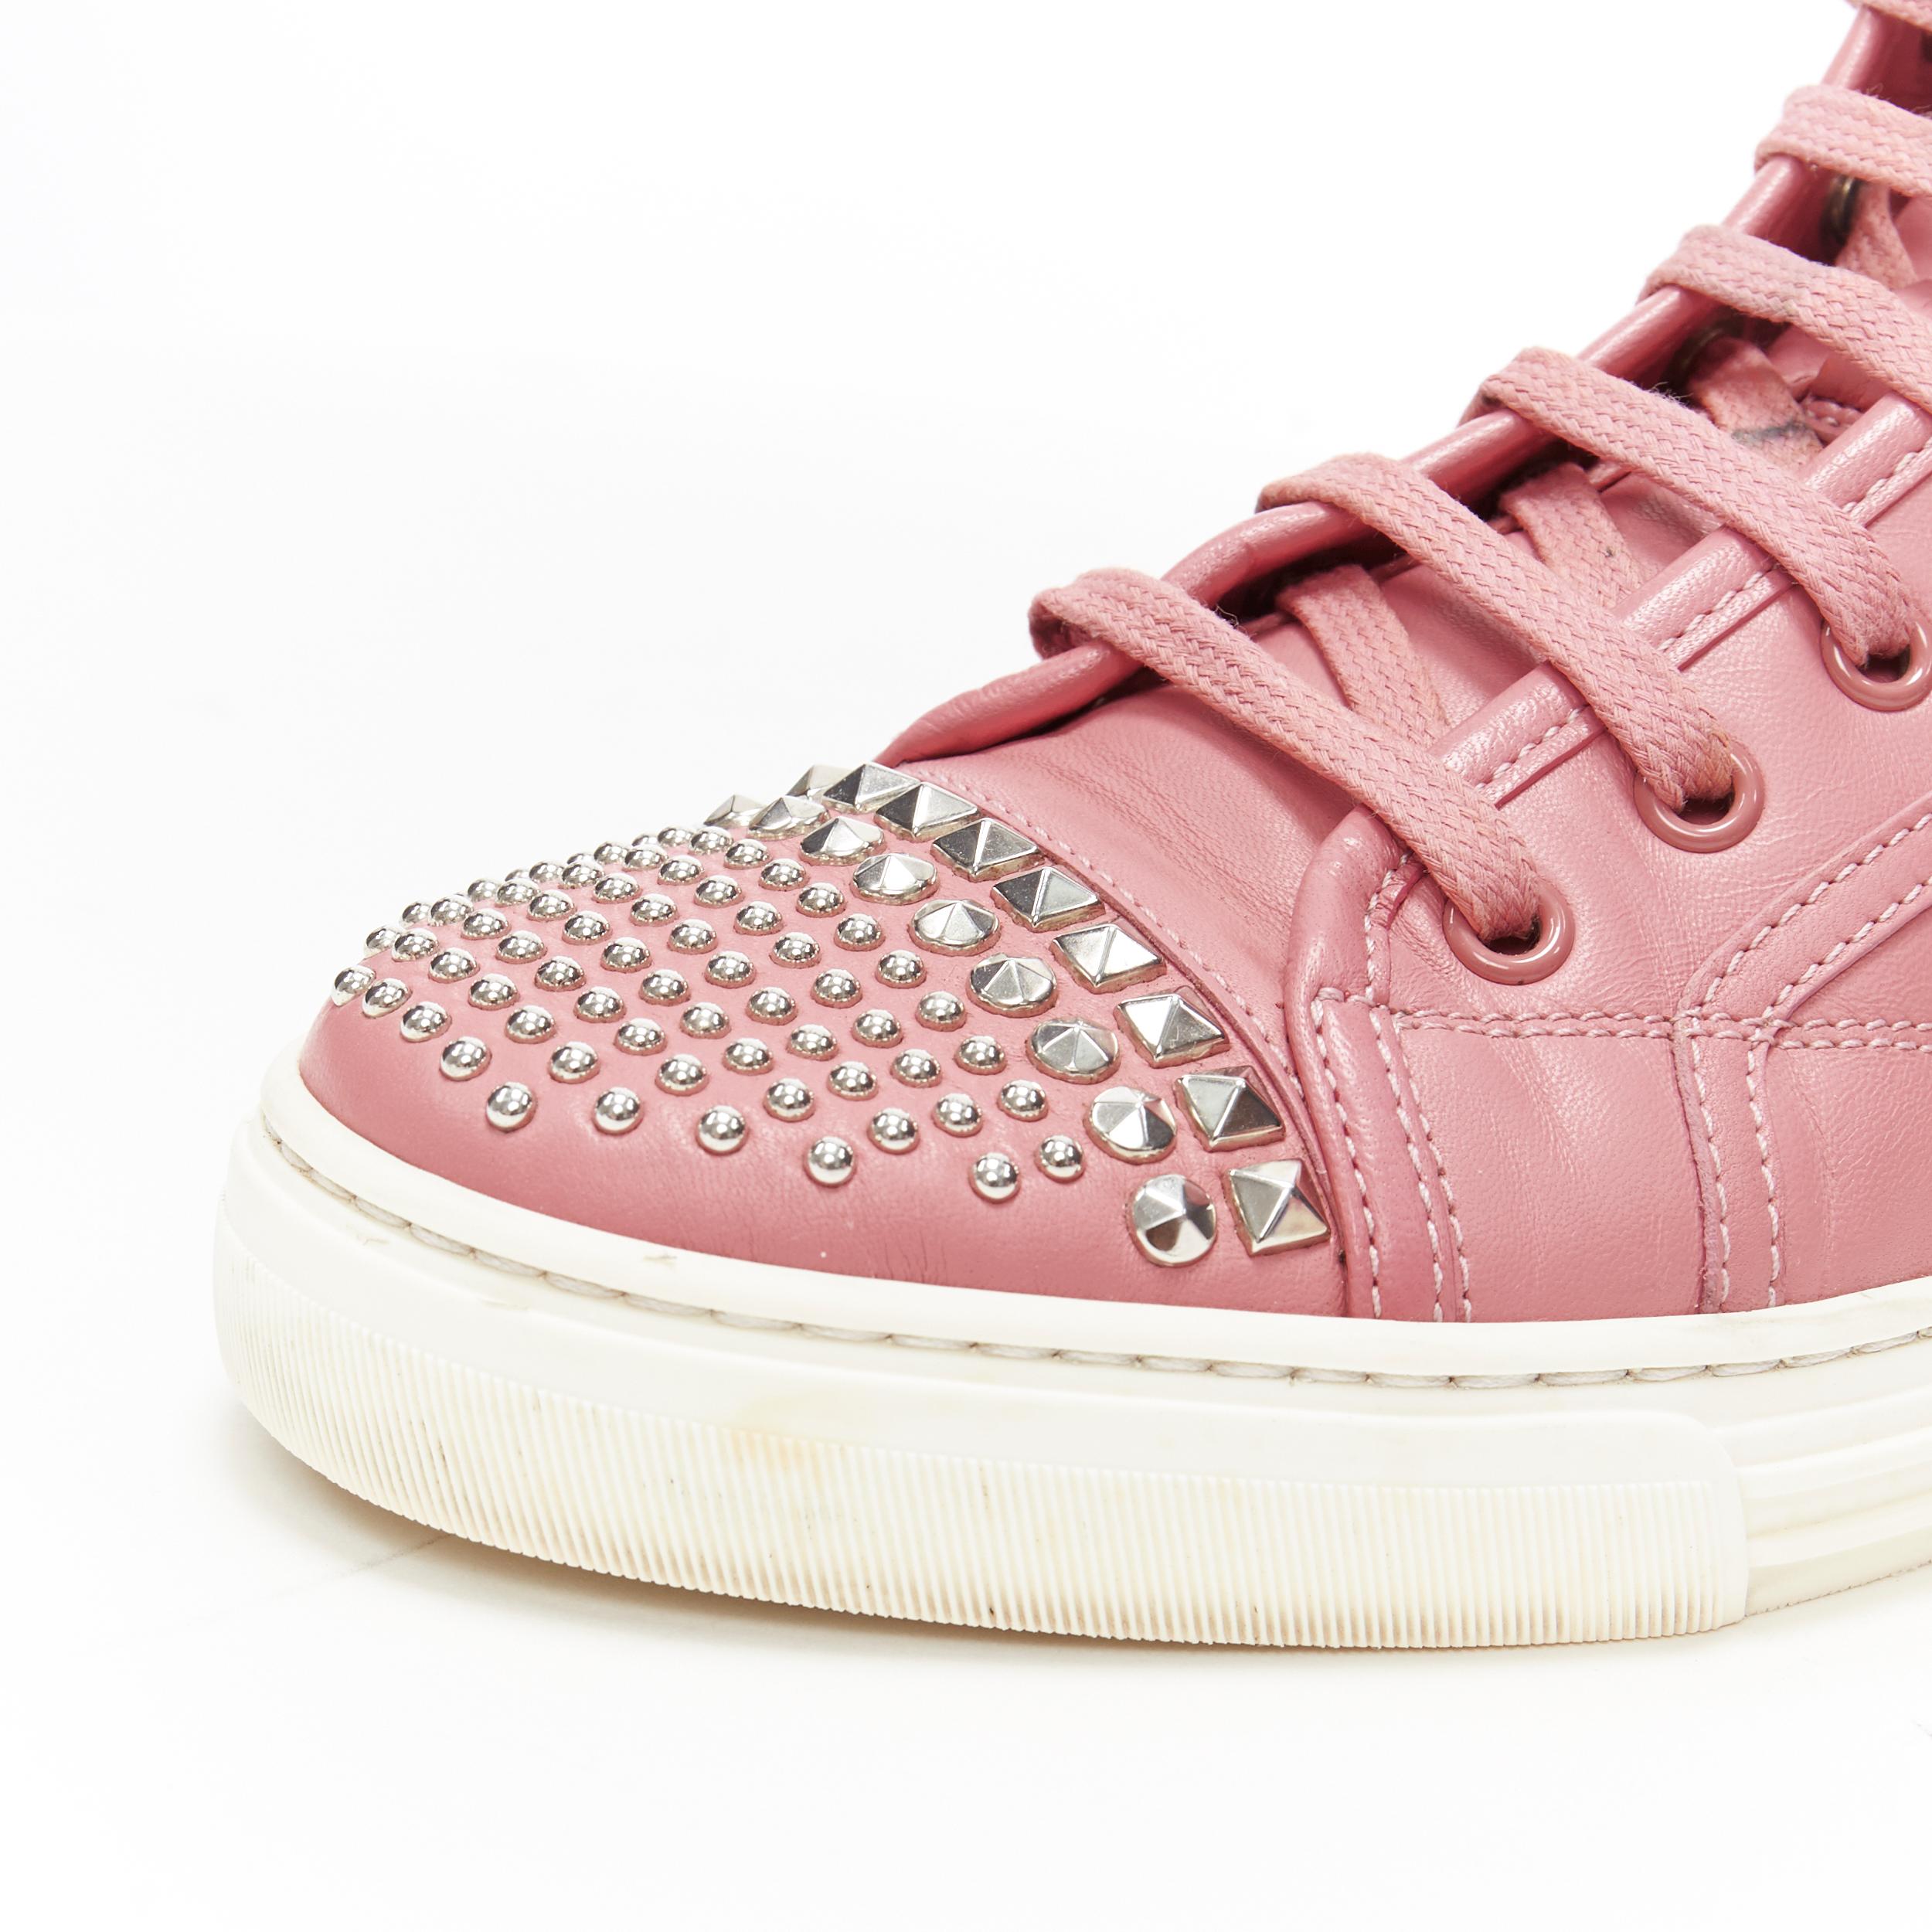 GUCCI pink leather studded toe cap high top casual sneakesr EU36.5 1